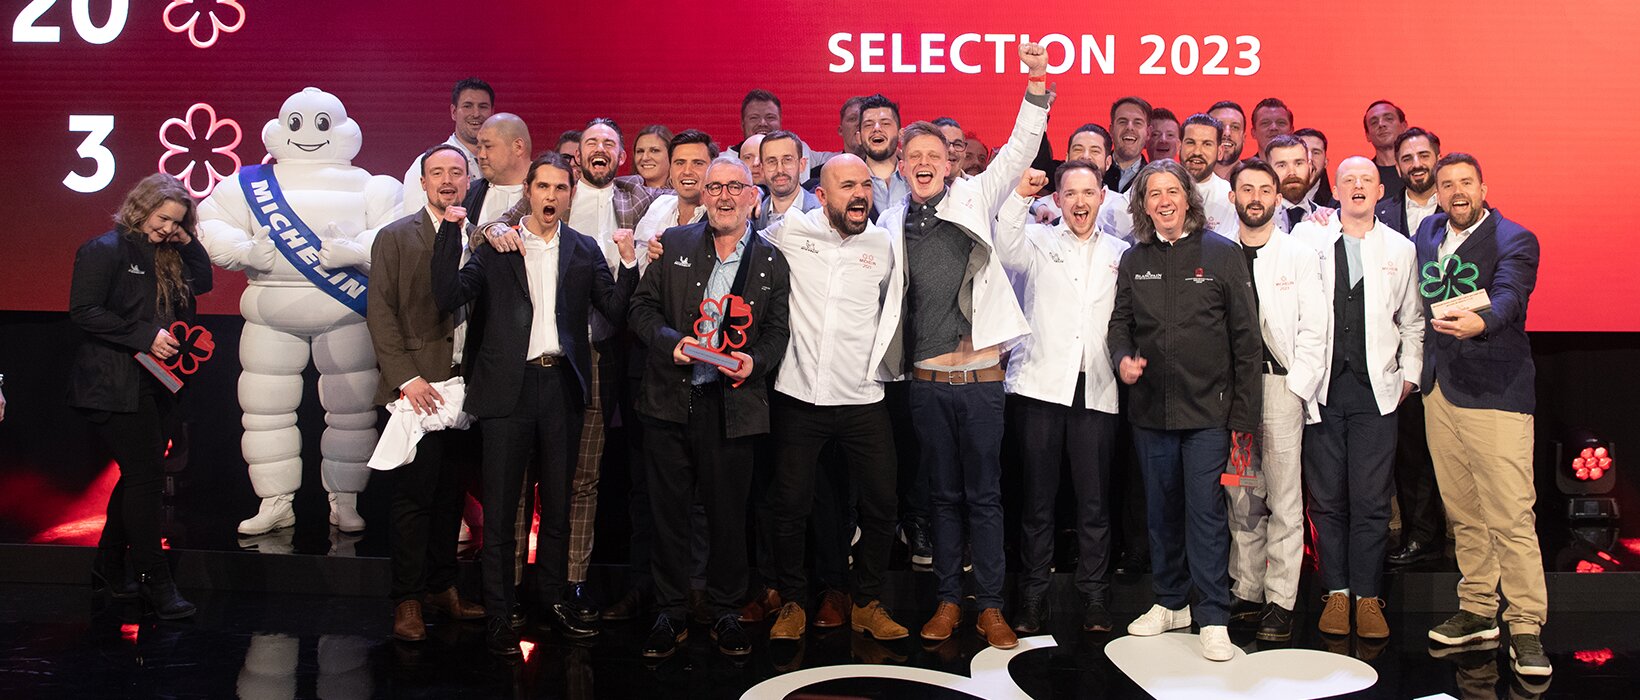 Michelin men, inspector quotas and pastry awards: what we learned from the 2023 Michelin Guide